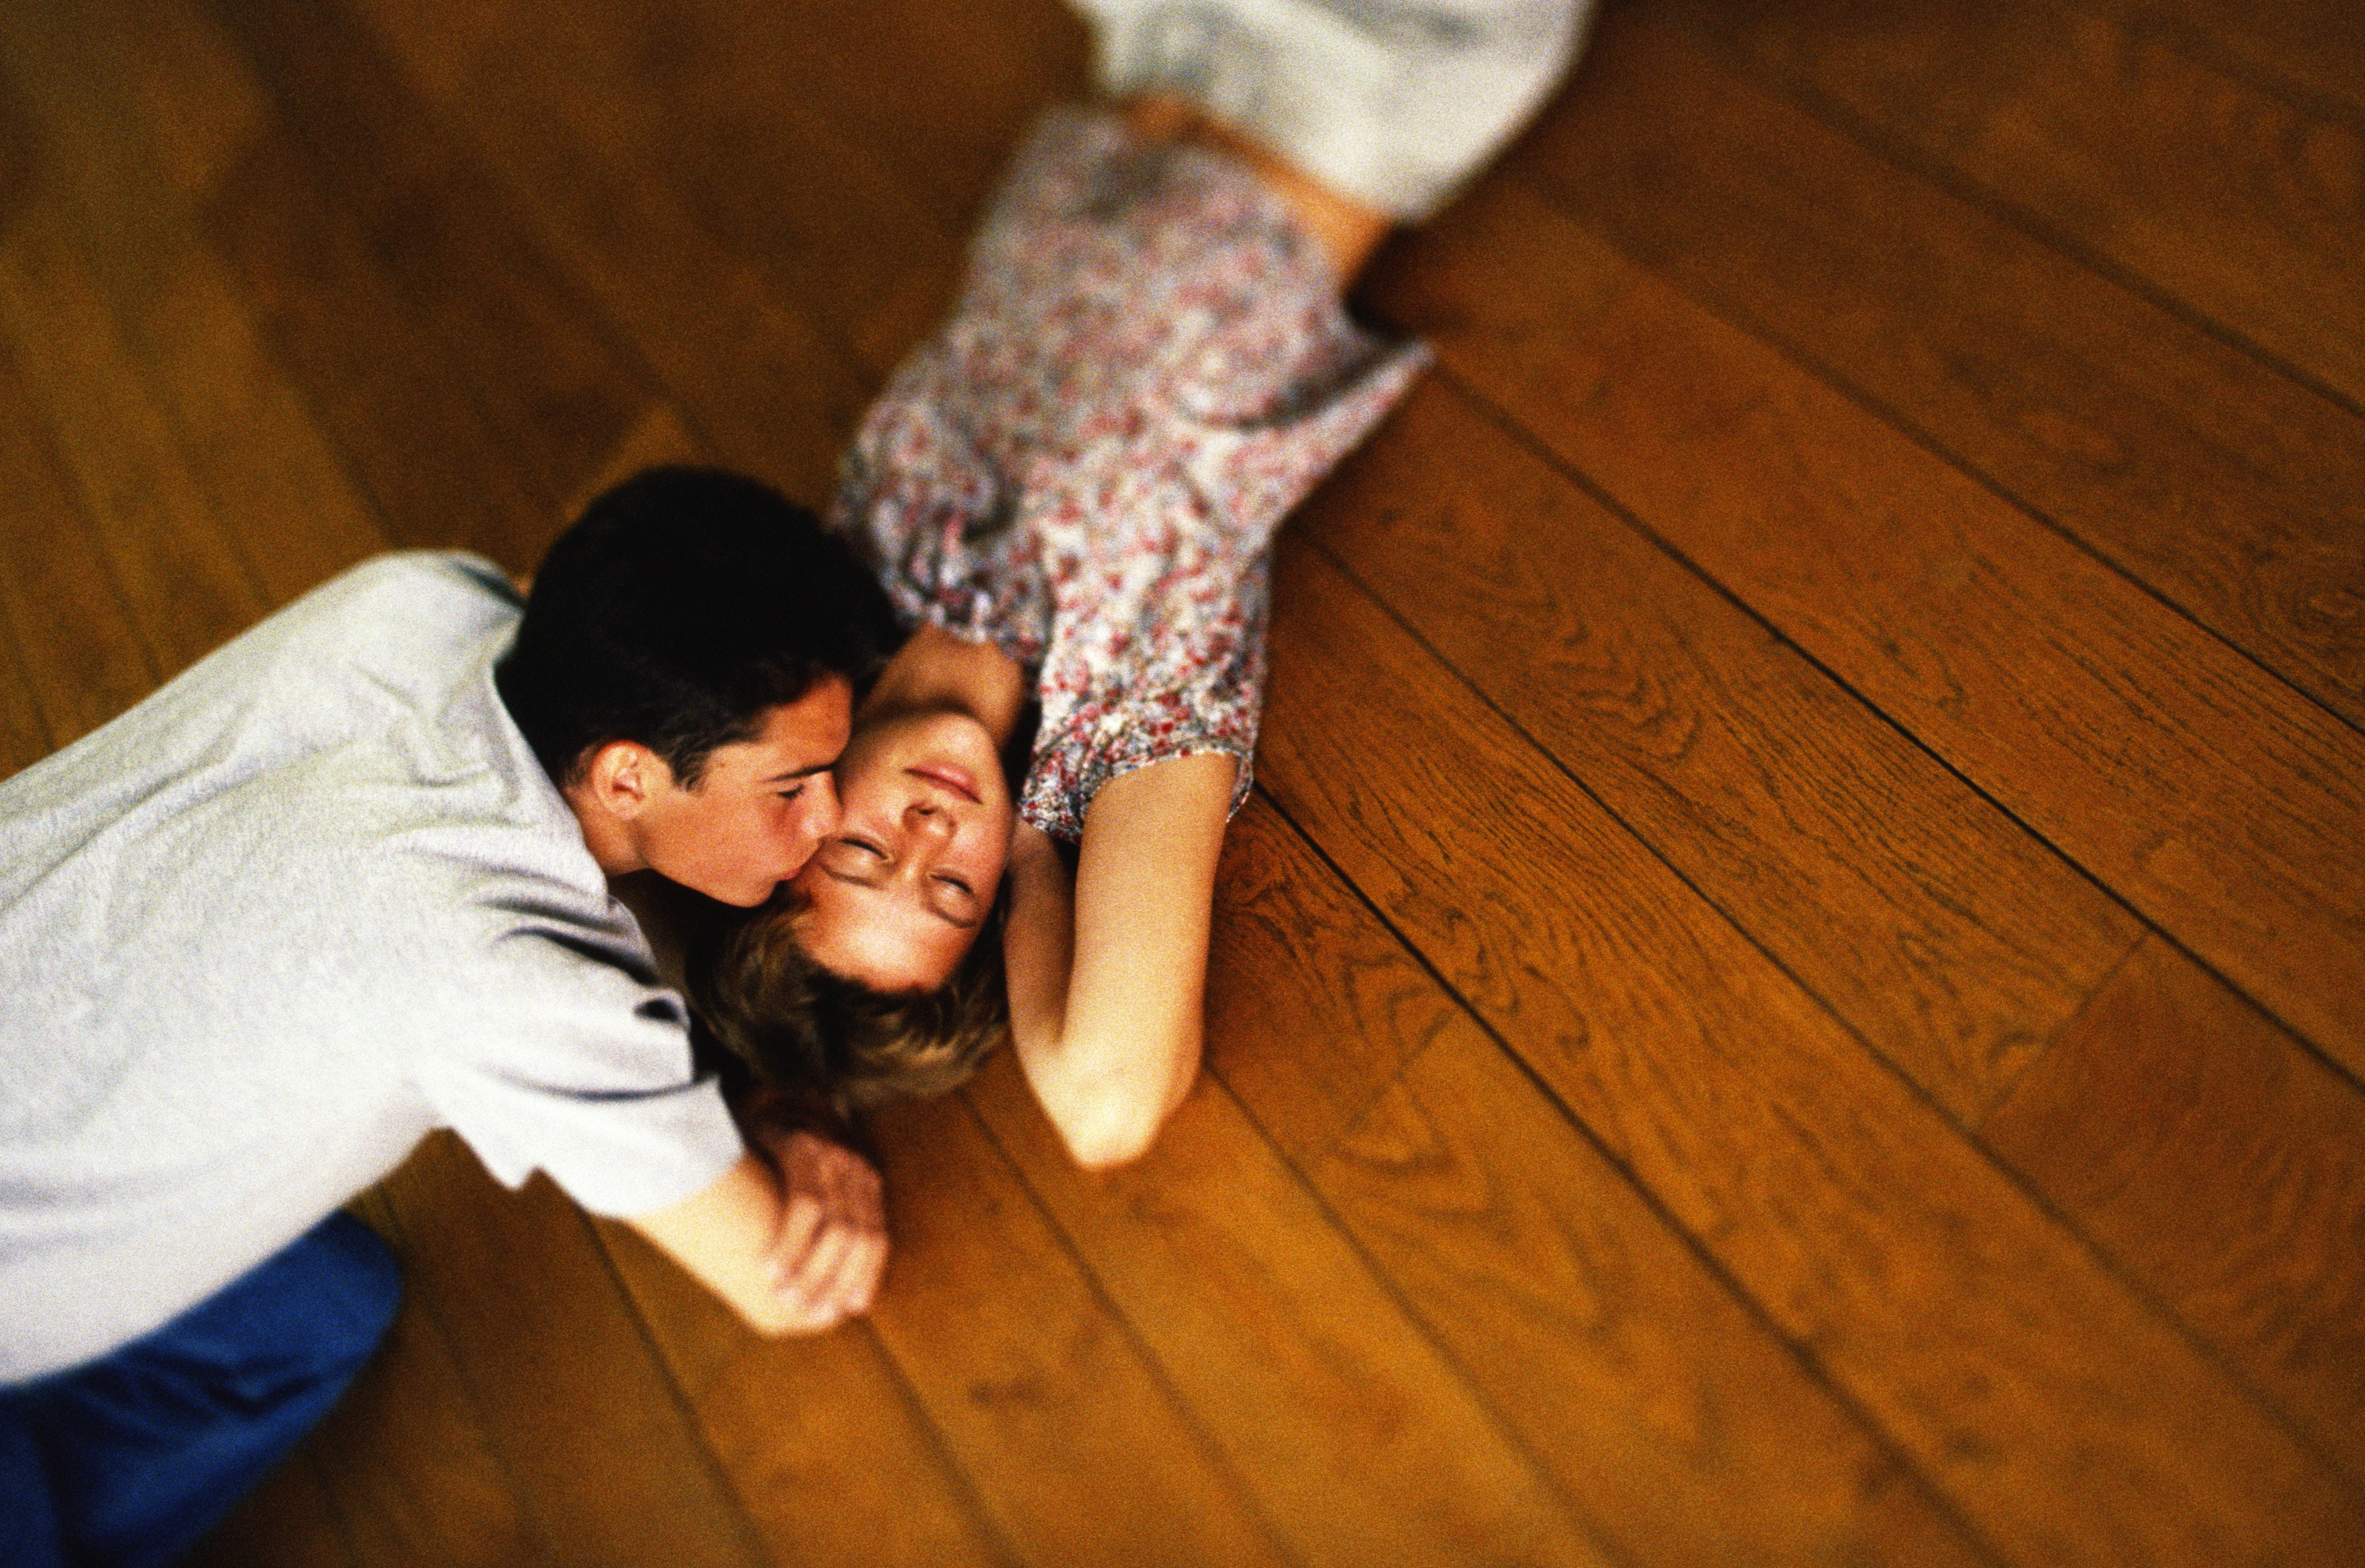 Two people lying on a wooden floor, embracing and smiling at each other